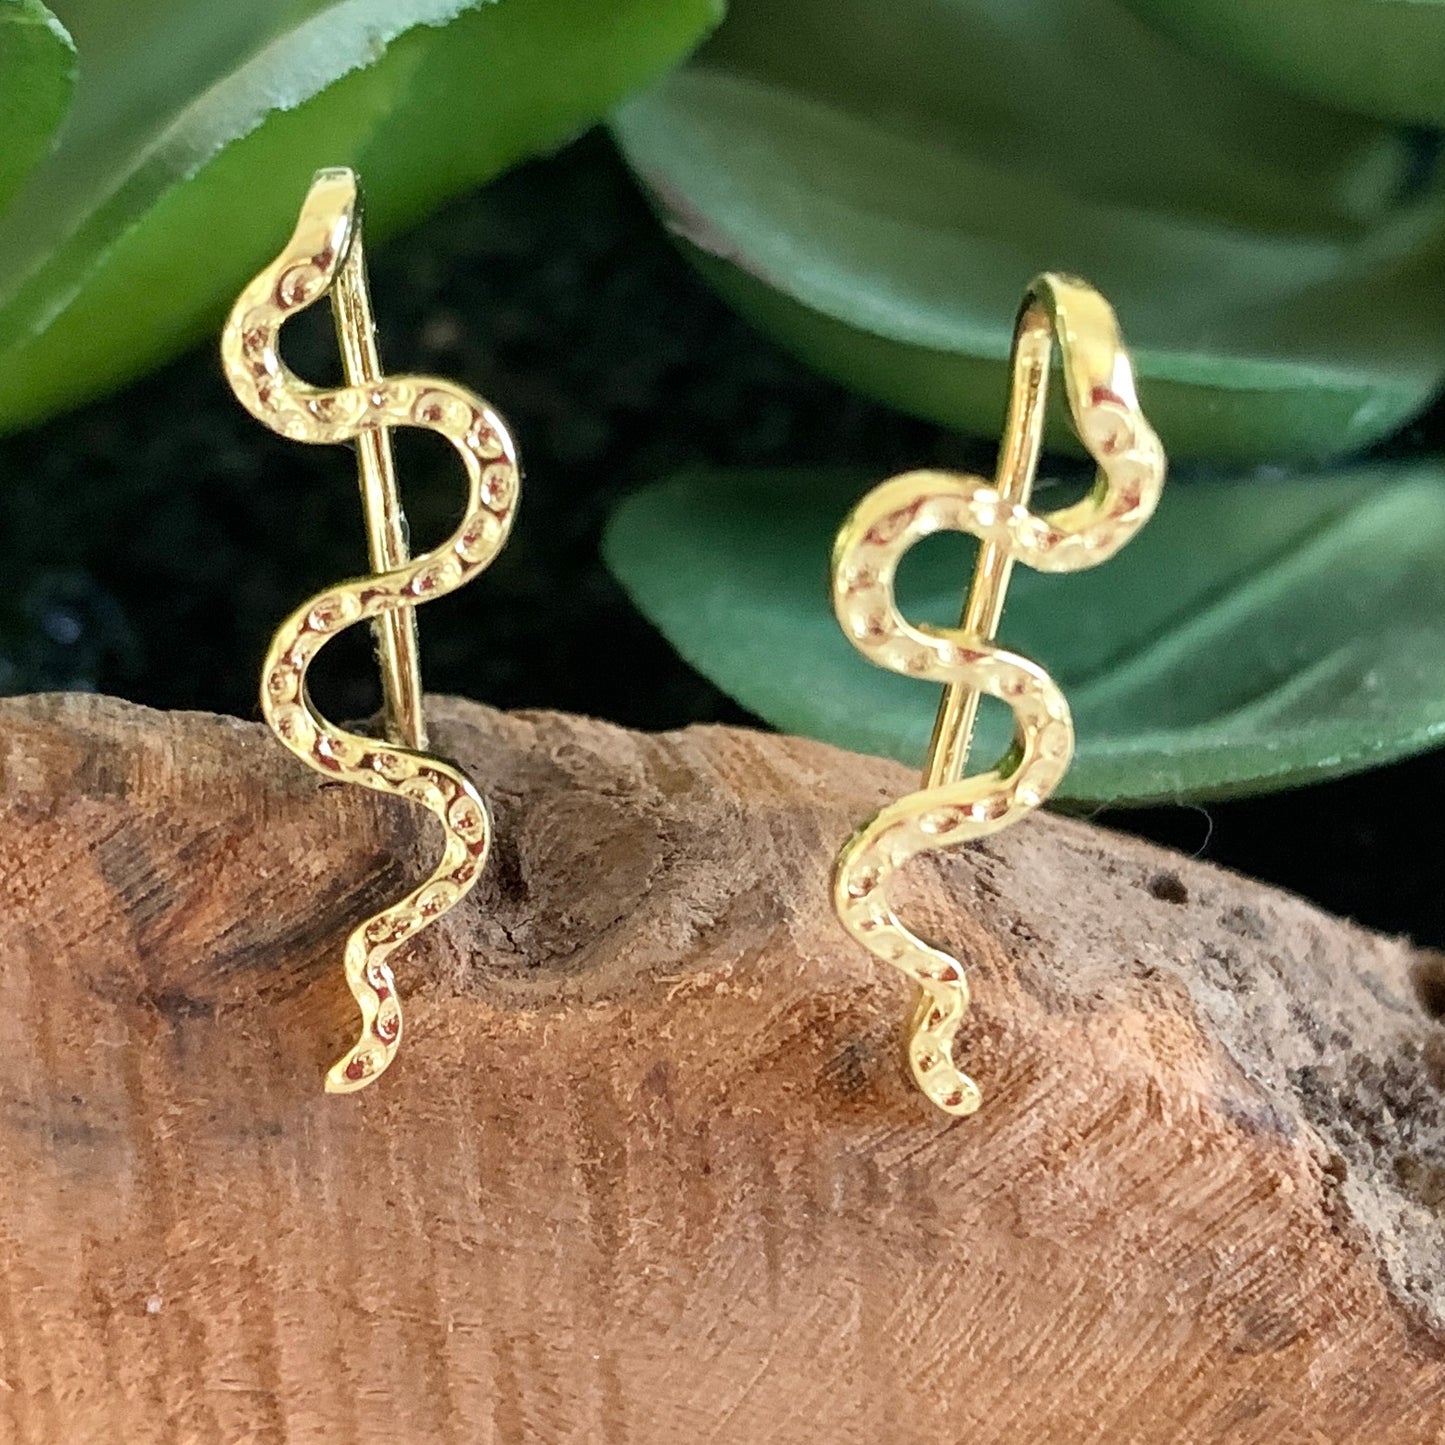 Snake Totem Earrings, Sterling Silver with 14K Gold Plating